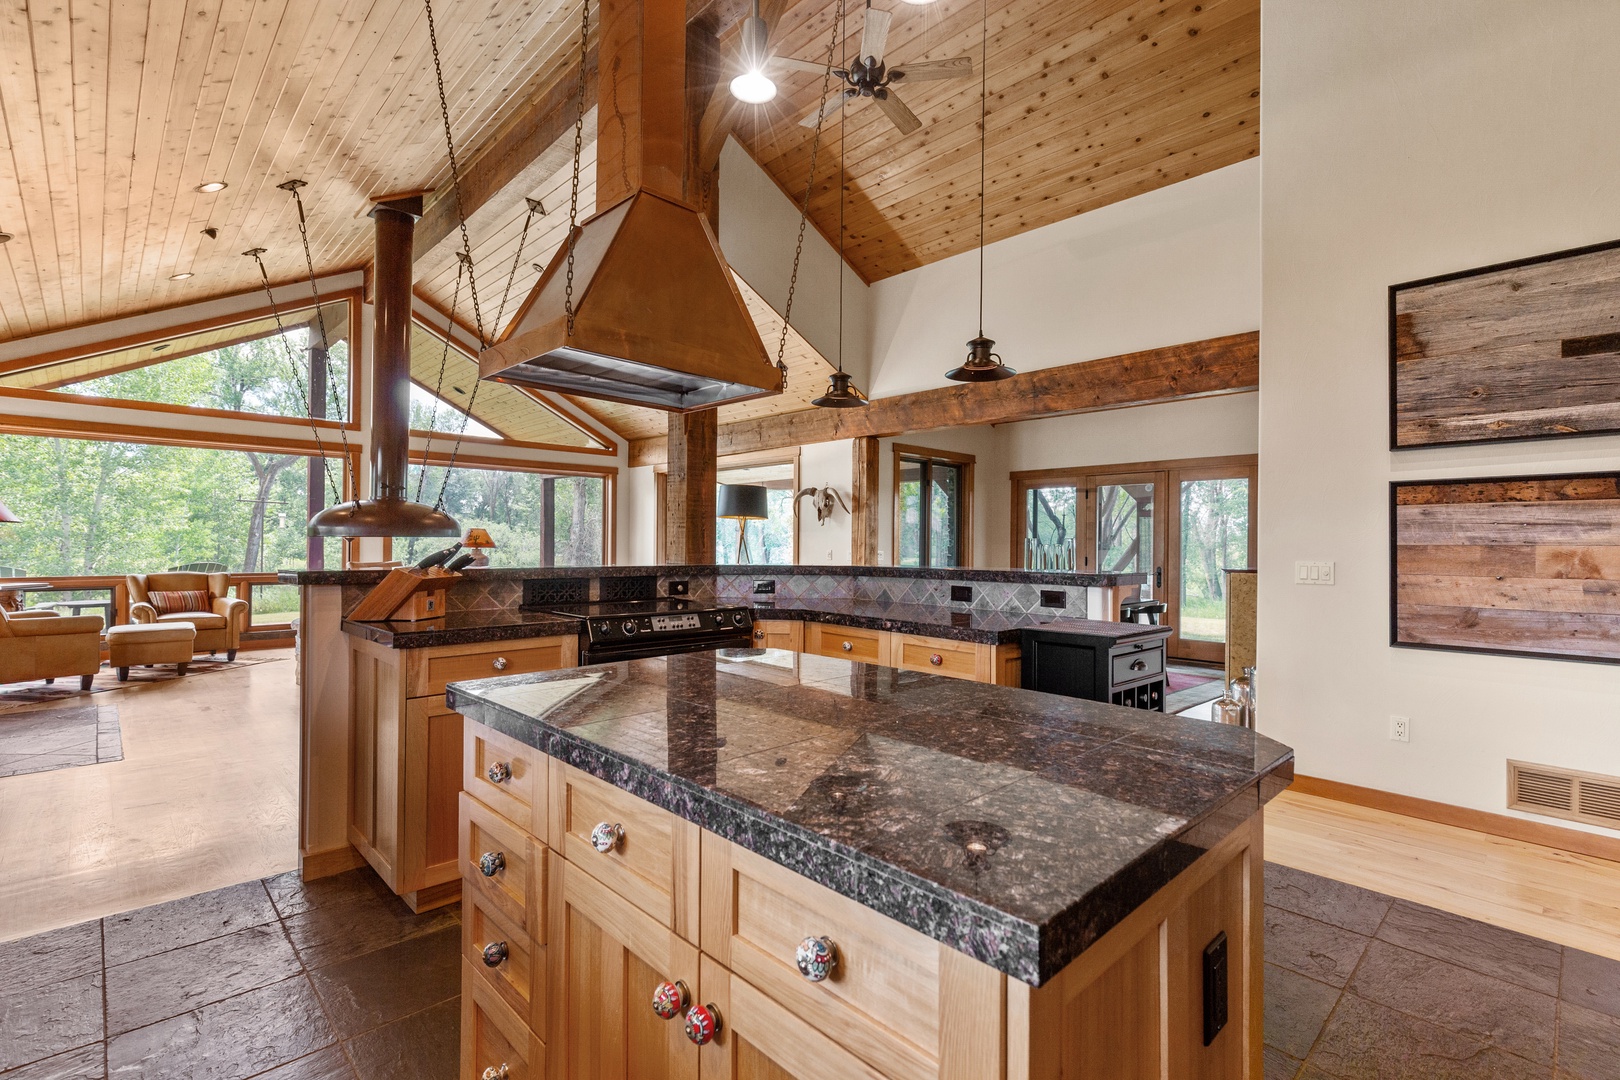 Bozeman Vacation Rentals, The Woodland Oasis - Kitchens like this will inspire you to gather and cook with friends all day long